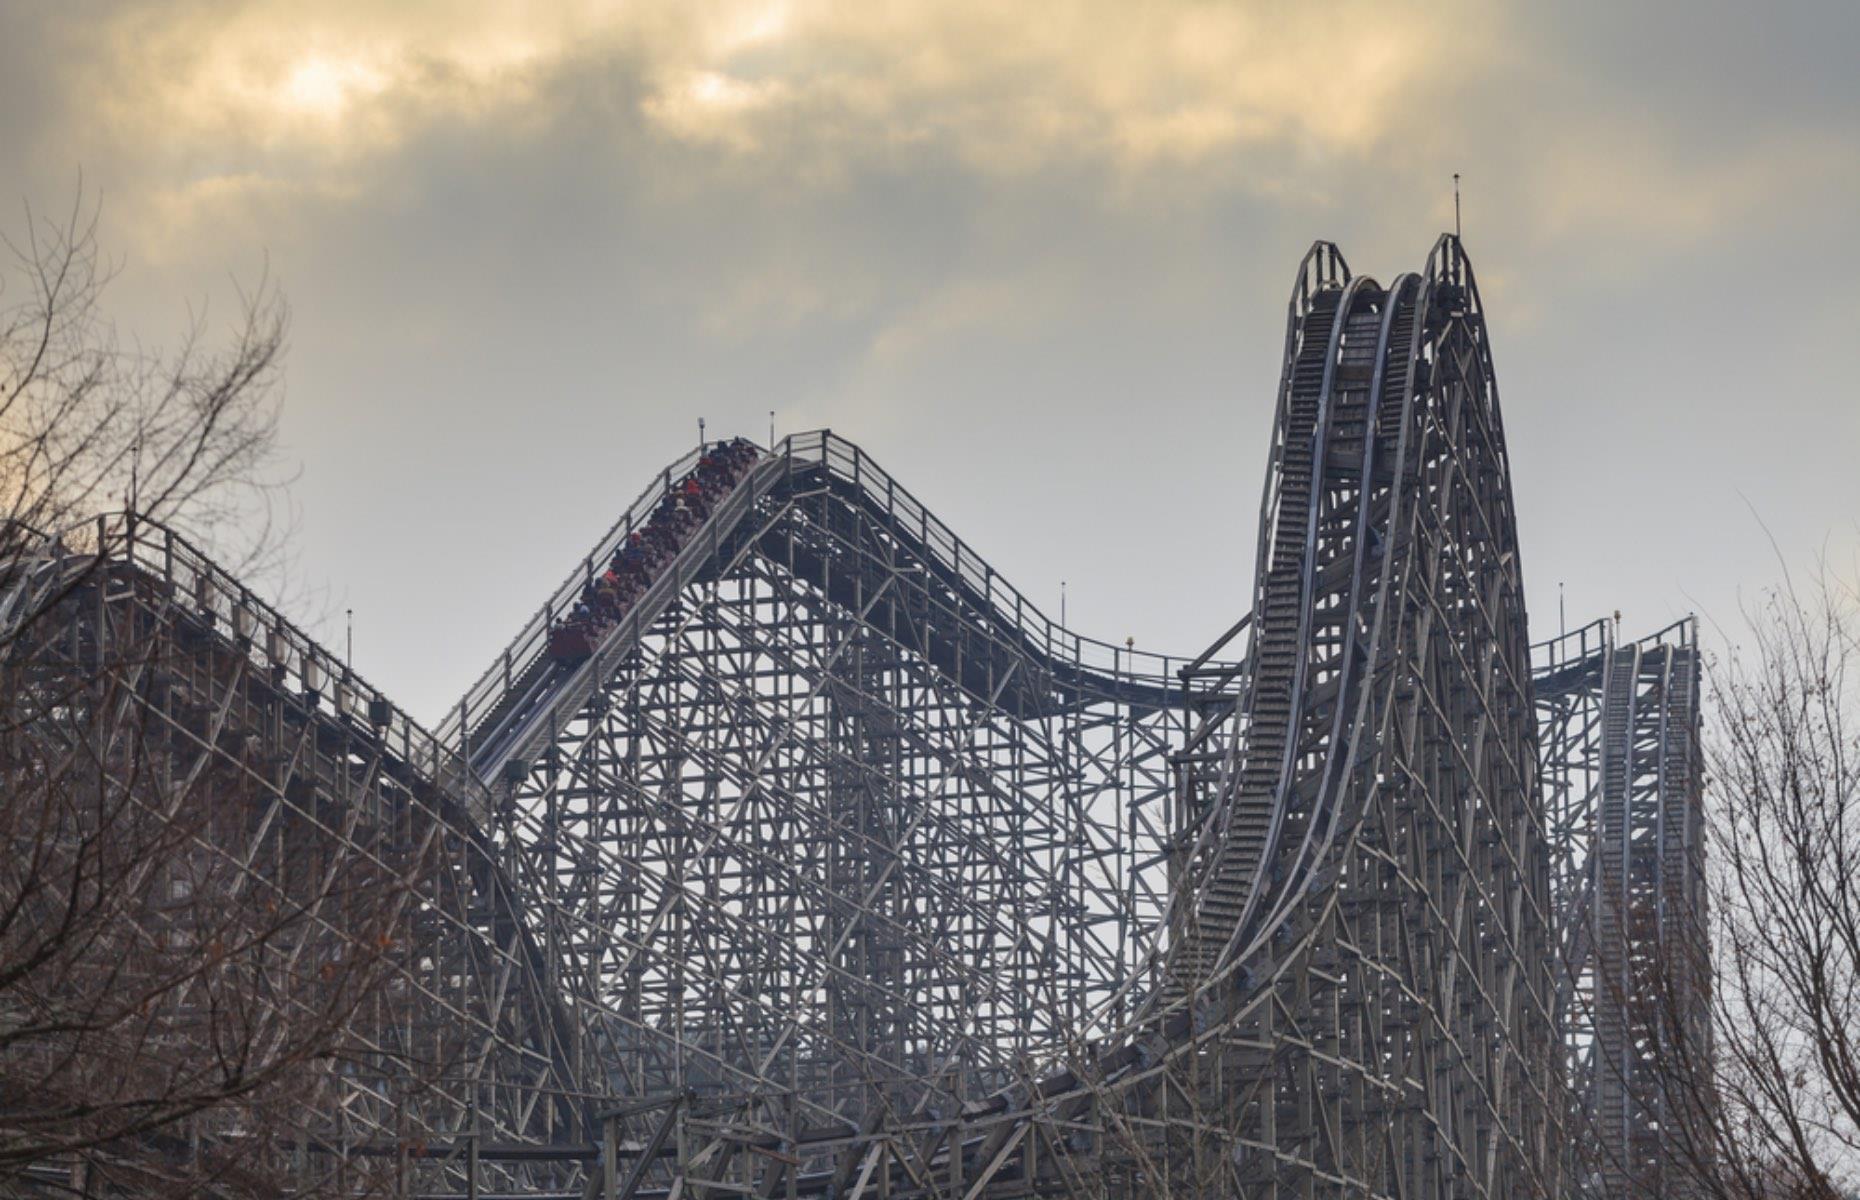 <p>It is a tie for the title of the world’s highest wooden roller coaster. Both the T Express in South Korea and Wildfire in Sweden rise 183.3 feet towards the sky. The T Express has a vertical drop of 150.9 feet while Wildfire drops from 160.8 feet.</p>